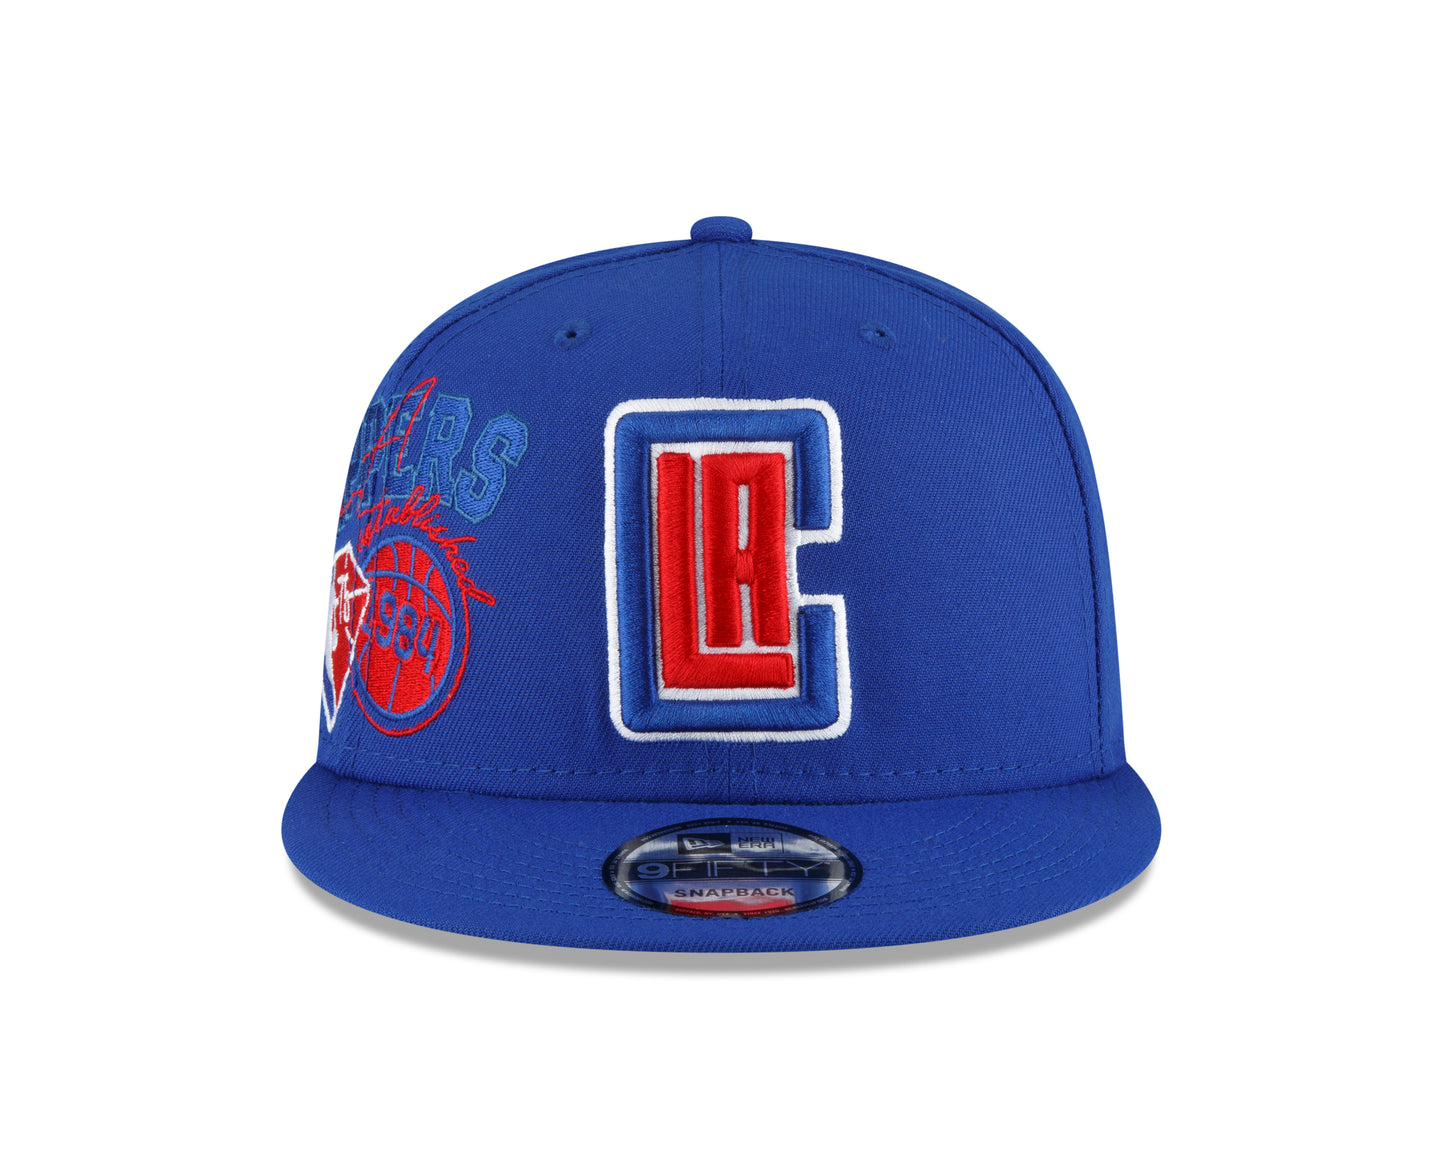 Los Angeles Clippers Authentic Back Half Series 9FIFTY Snap Back Hat - Blue